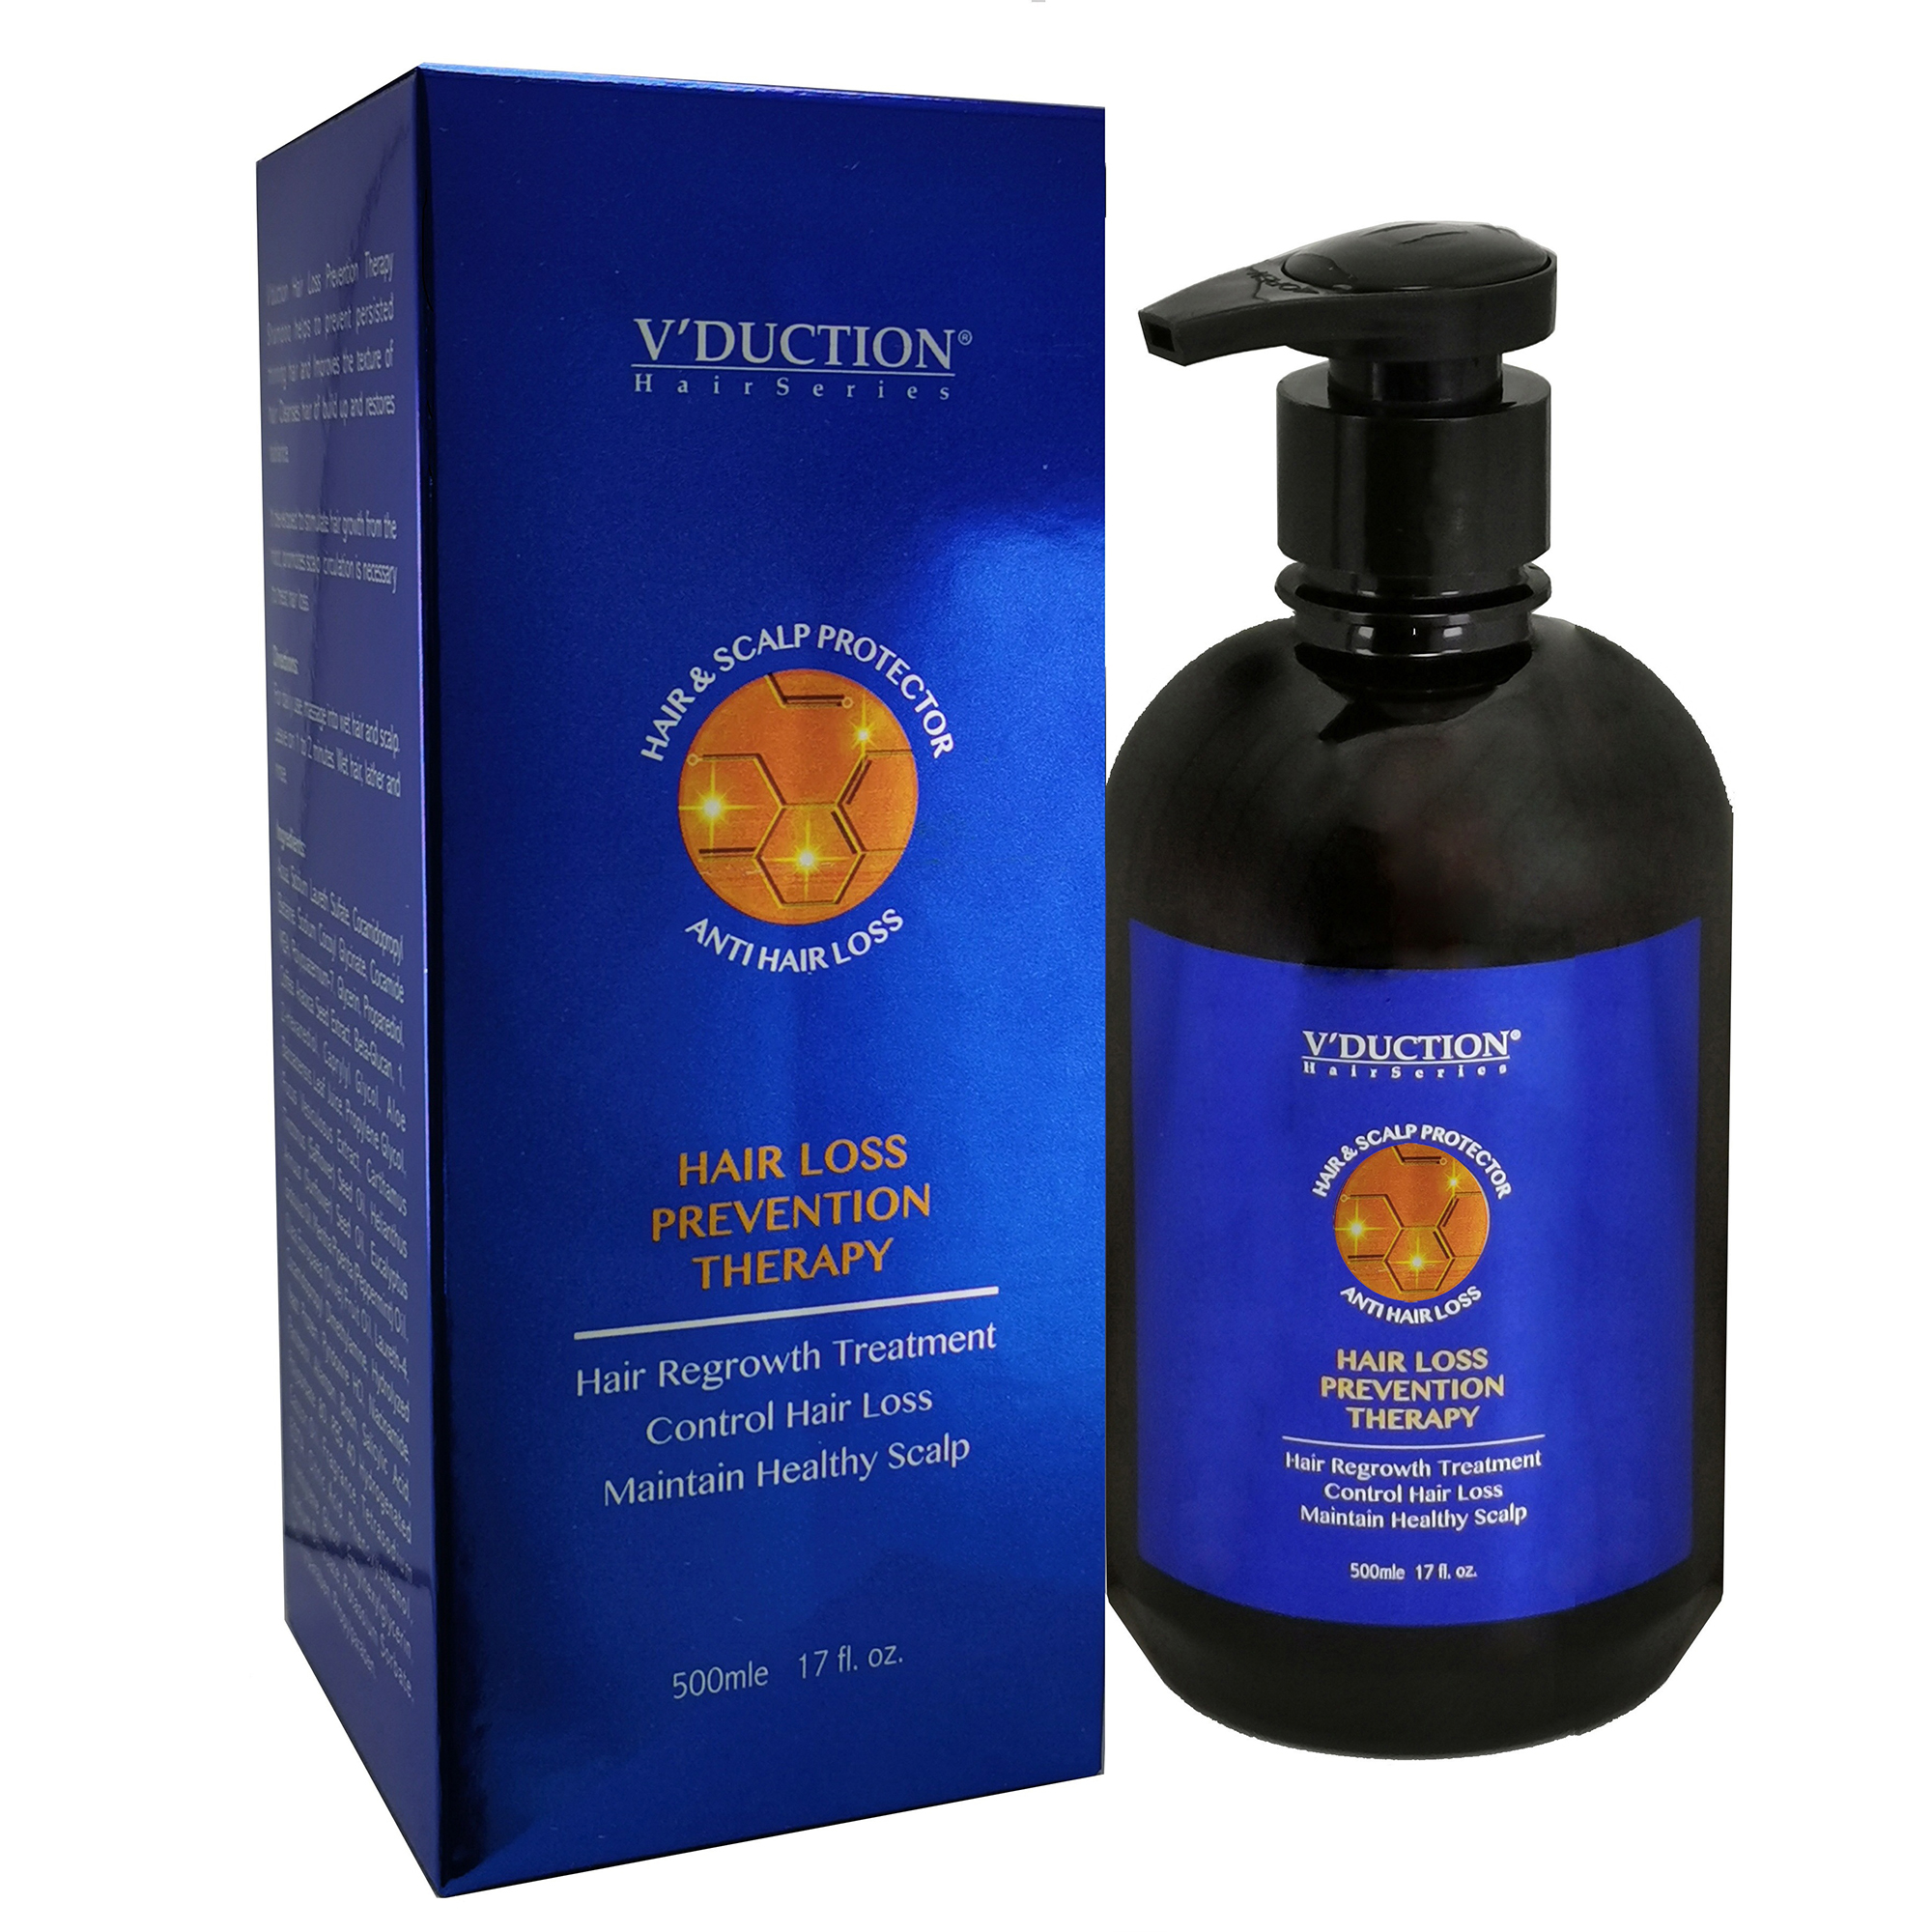 Vduction Hair Loss Prevention Therapy Shampoo